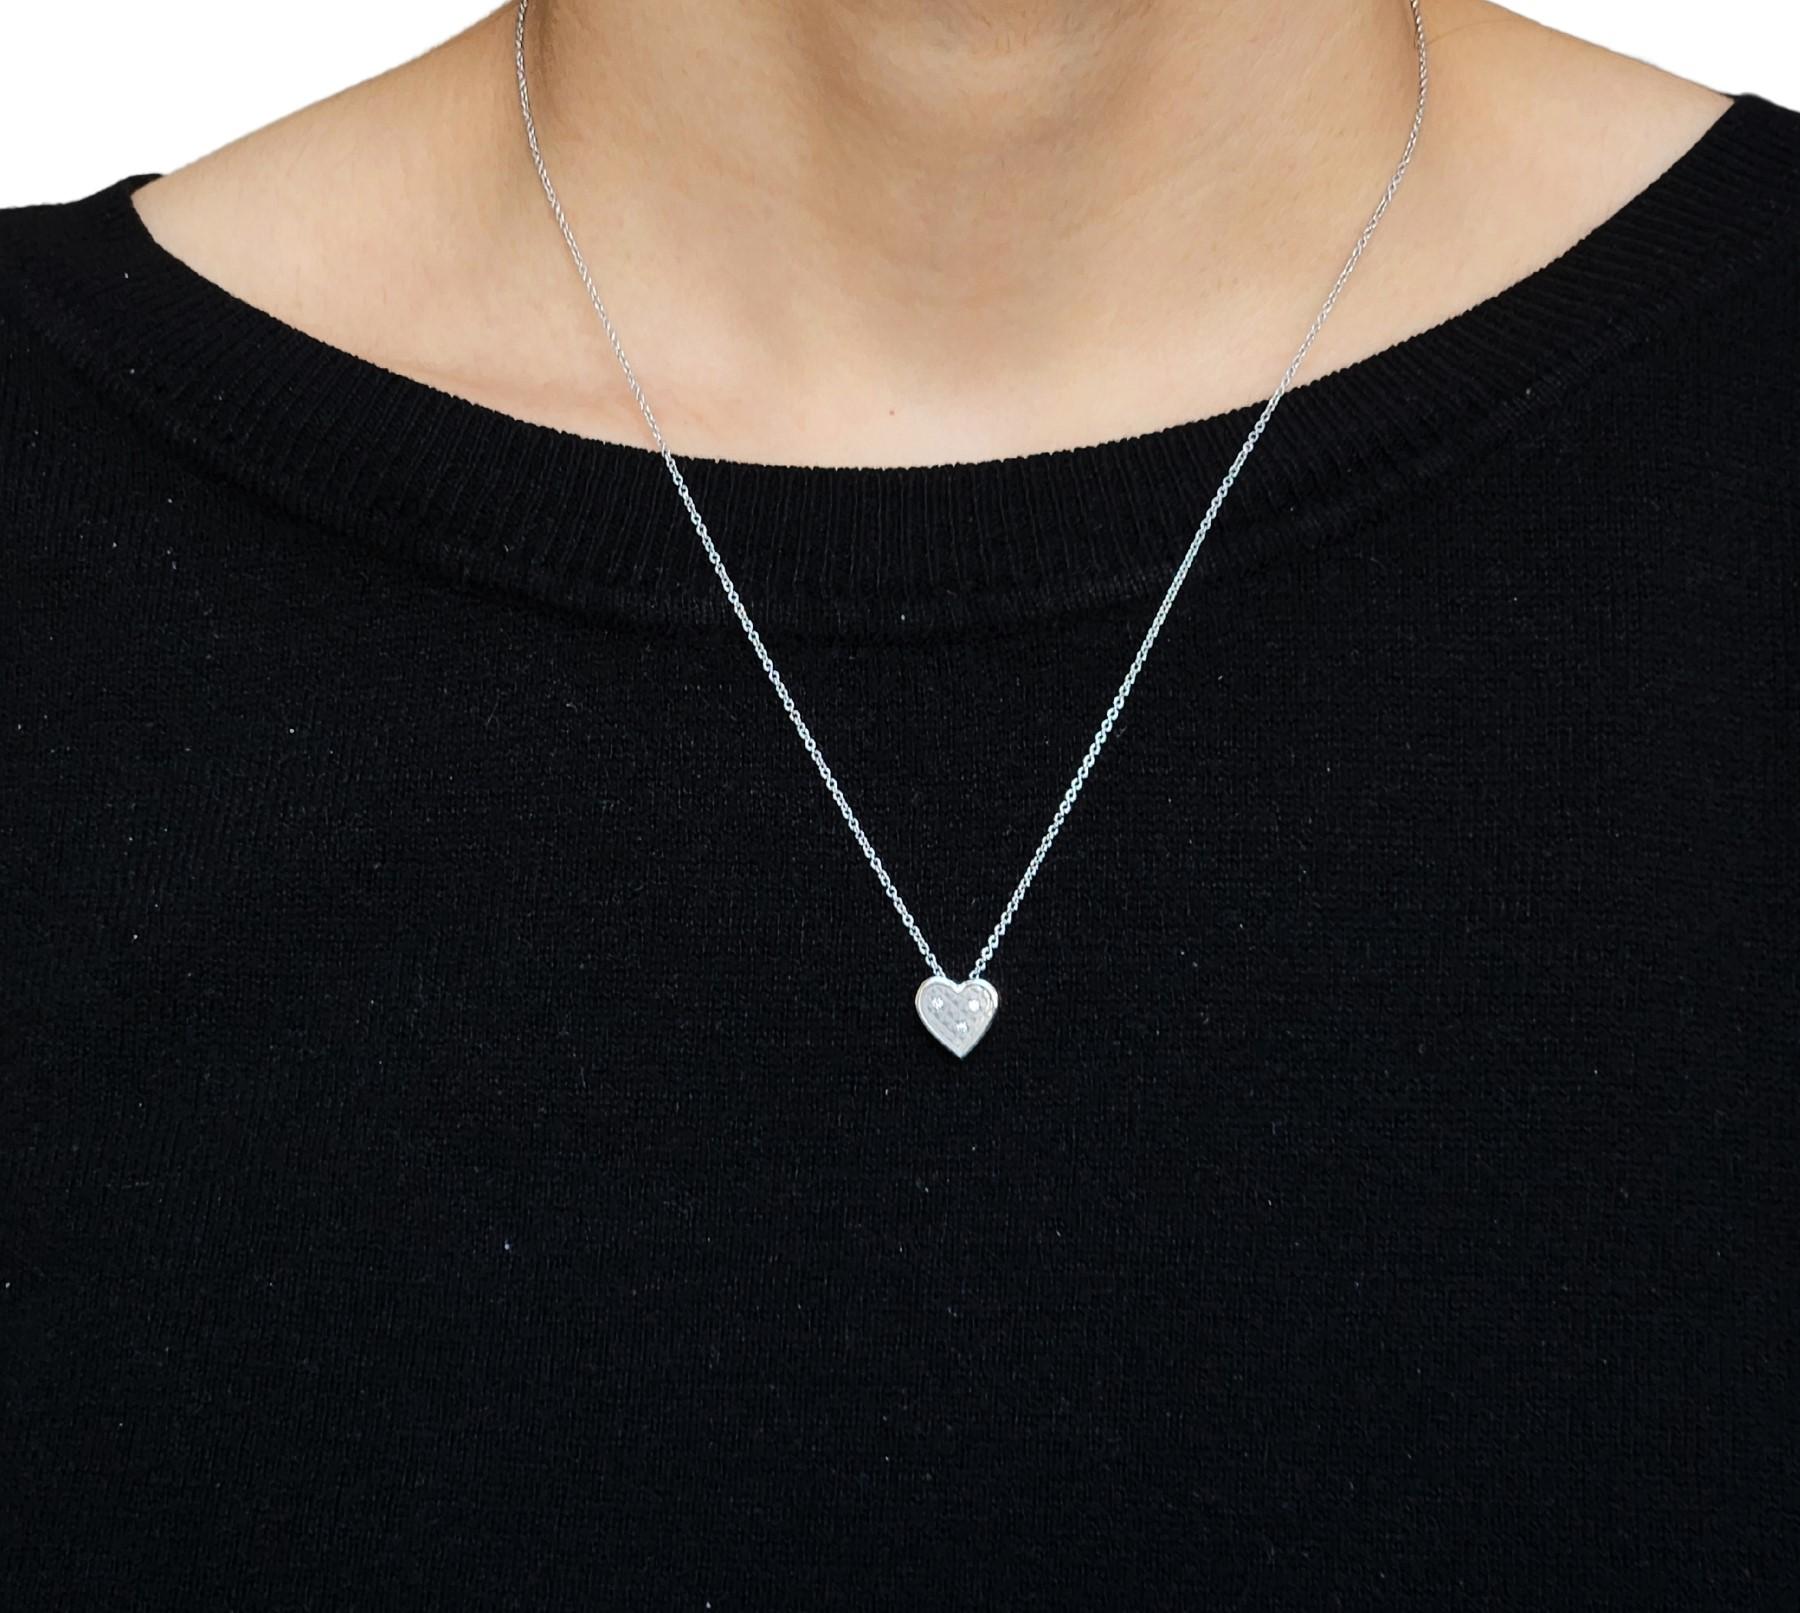 Continuing with the unique mini pyramid matte pattern with interspersed white diamonds and platinum, the Heart slide can be an everyday necklace. The border is high polished to contrast with the matte finish and the diamonds give a surprise sparkle